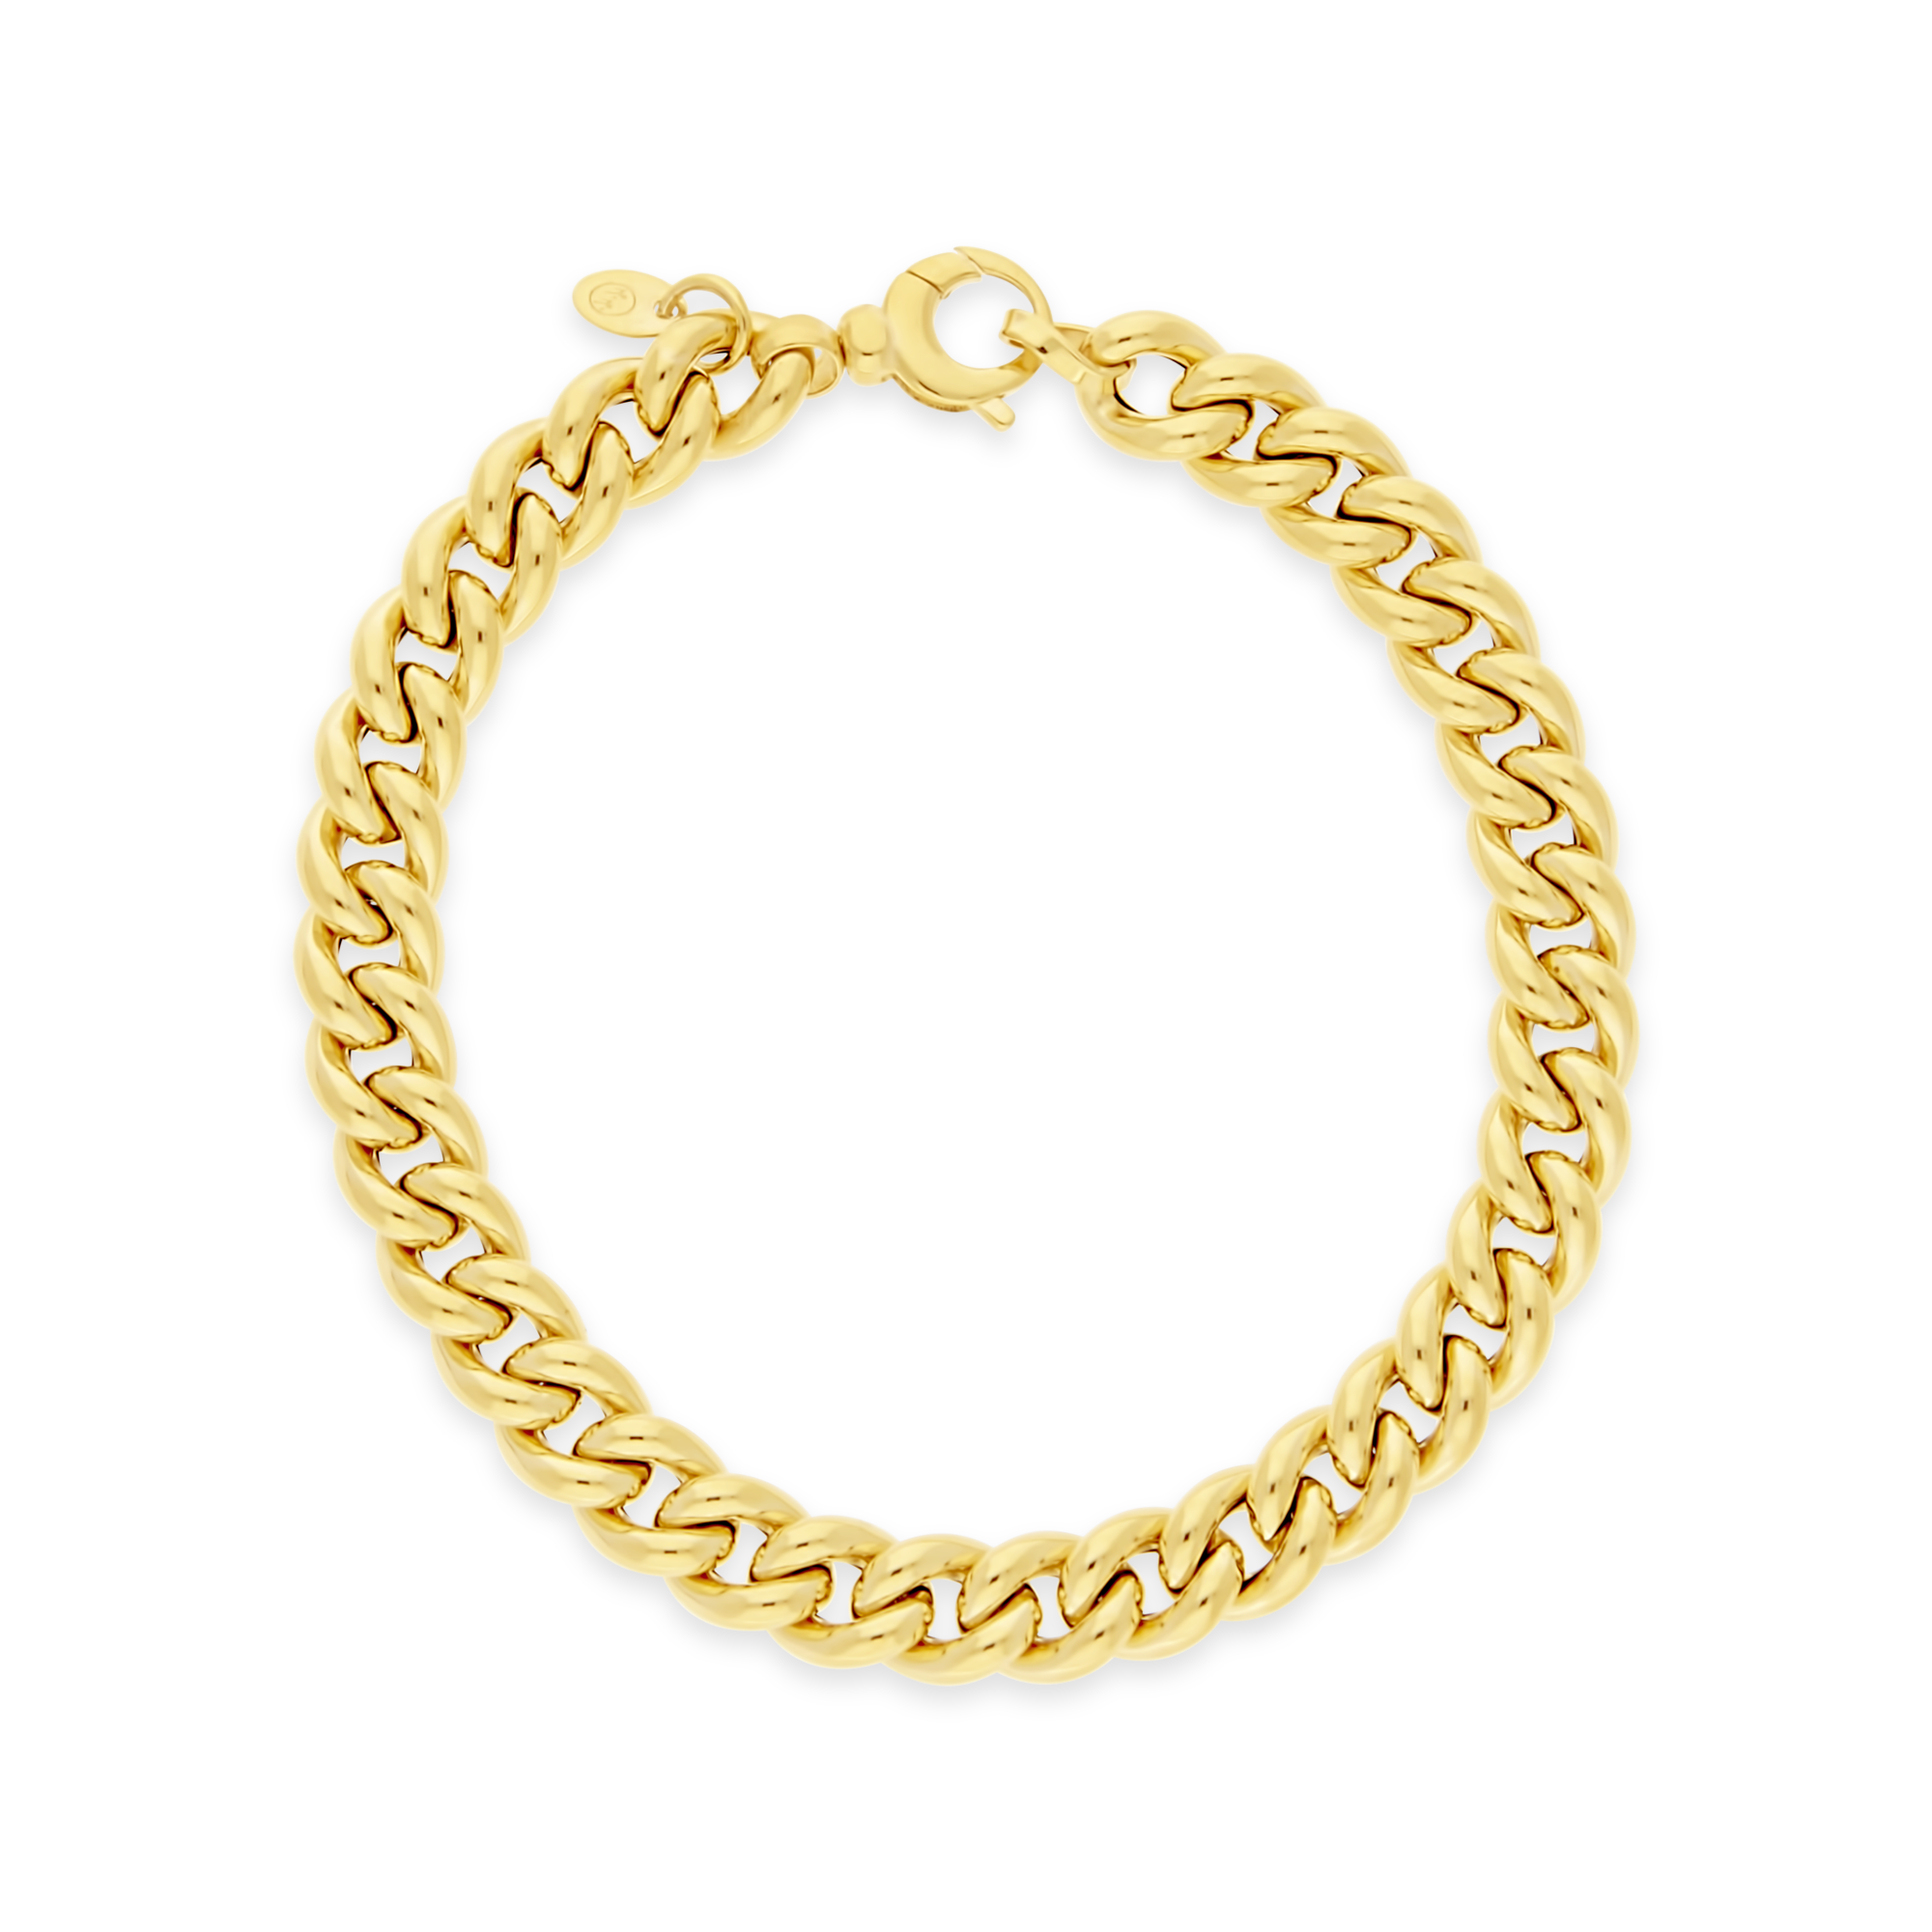 Pre-Owned 9ct Gold Curb Bracelet With Heart Padlock – Charles Fish